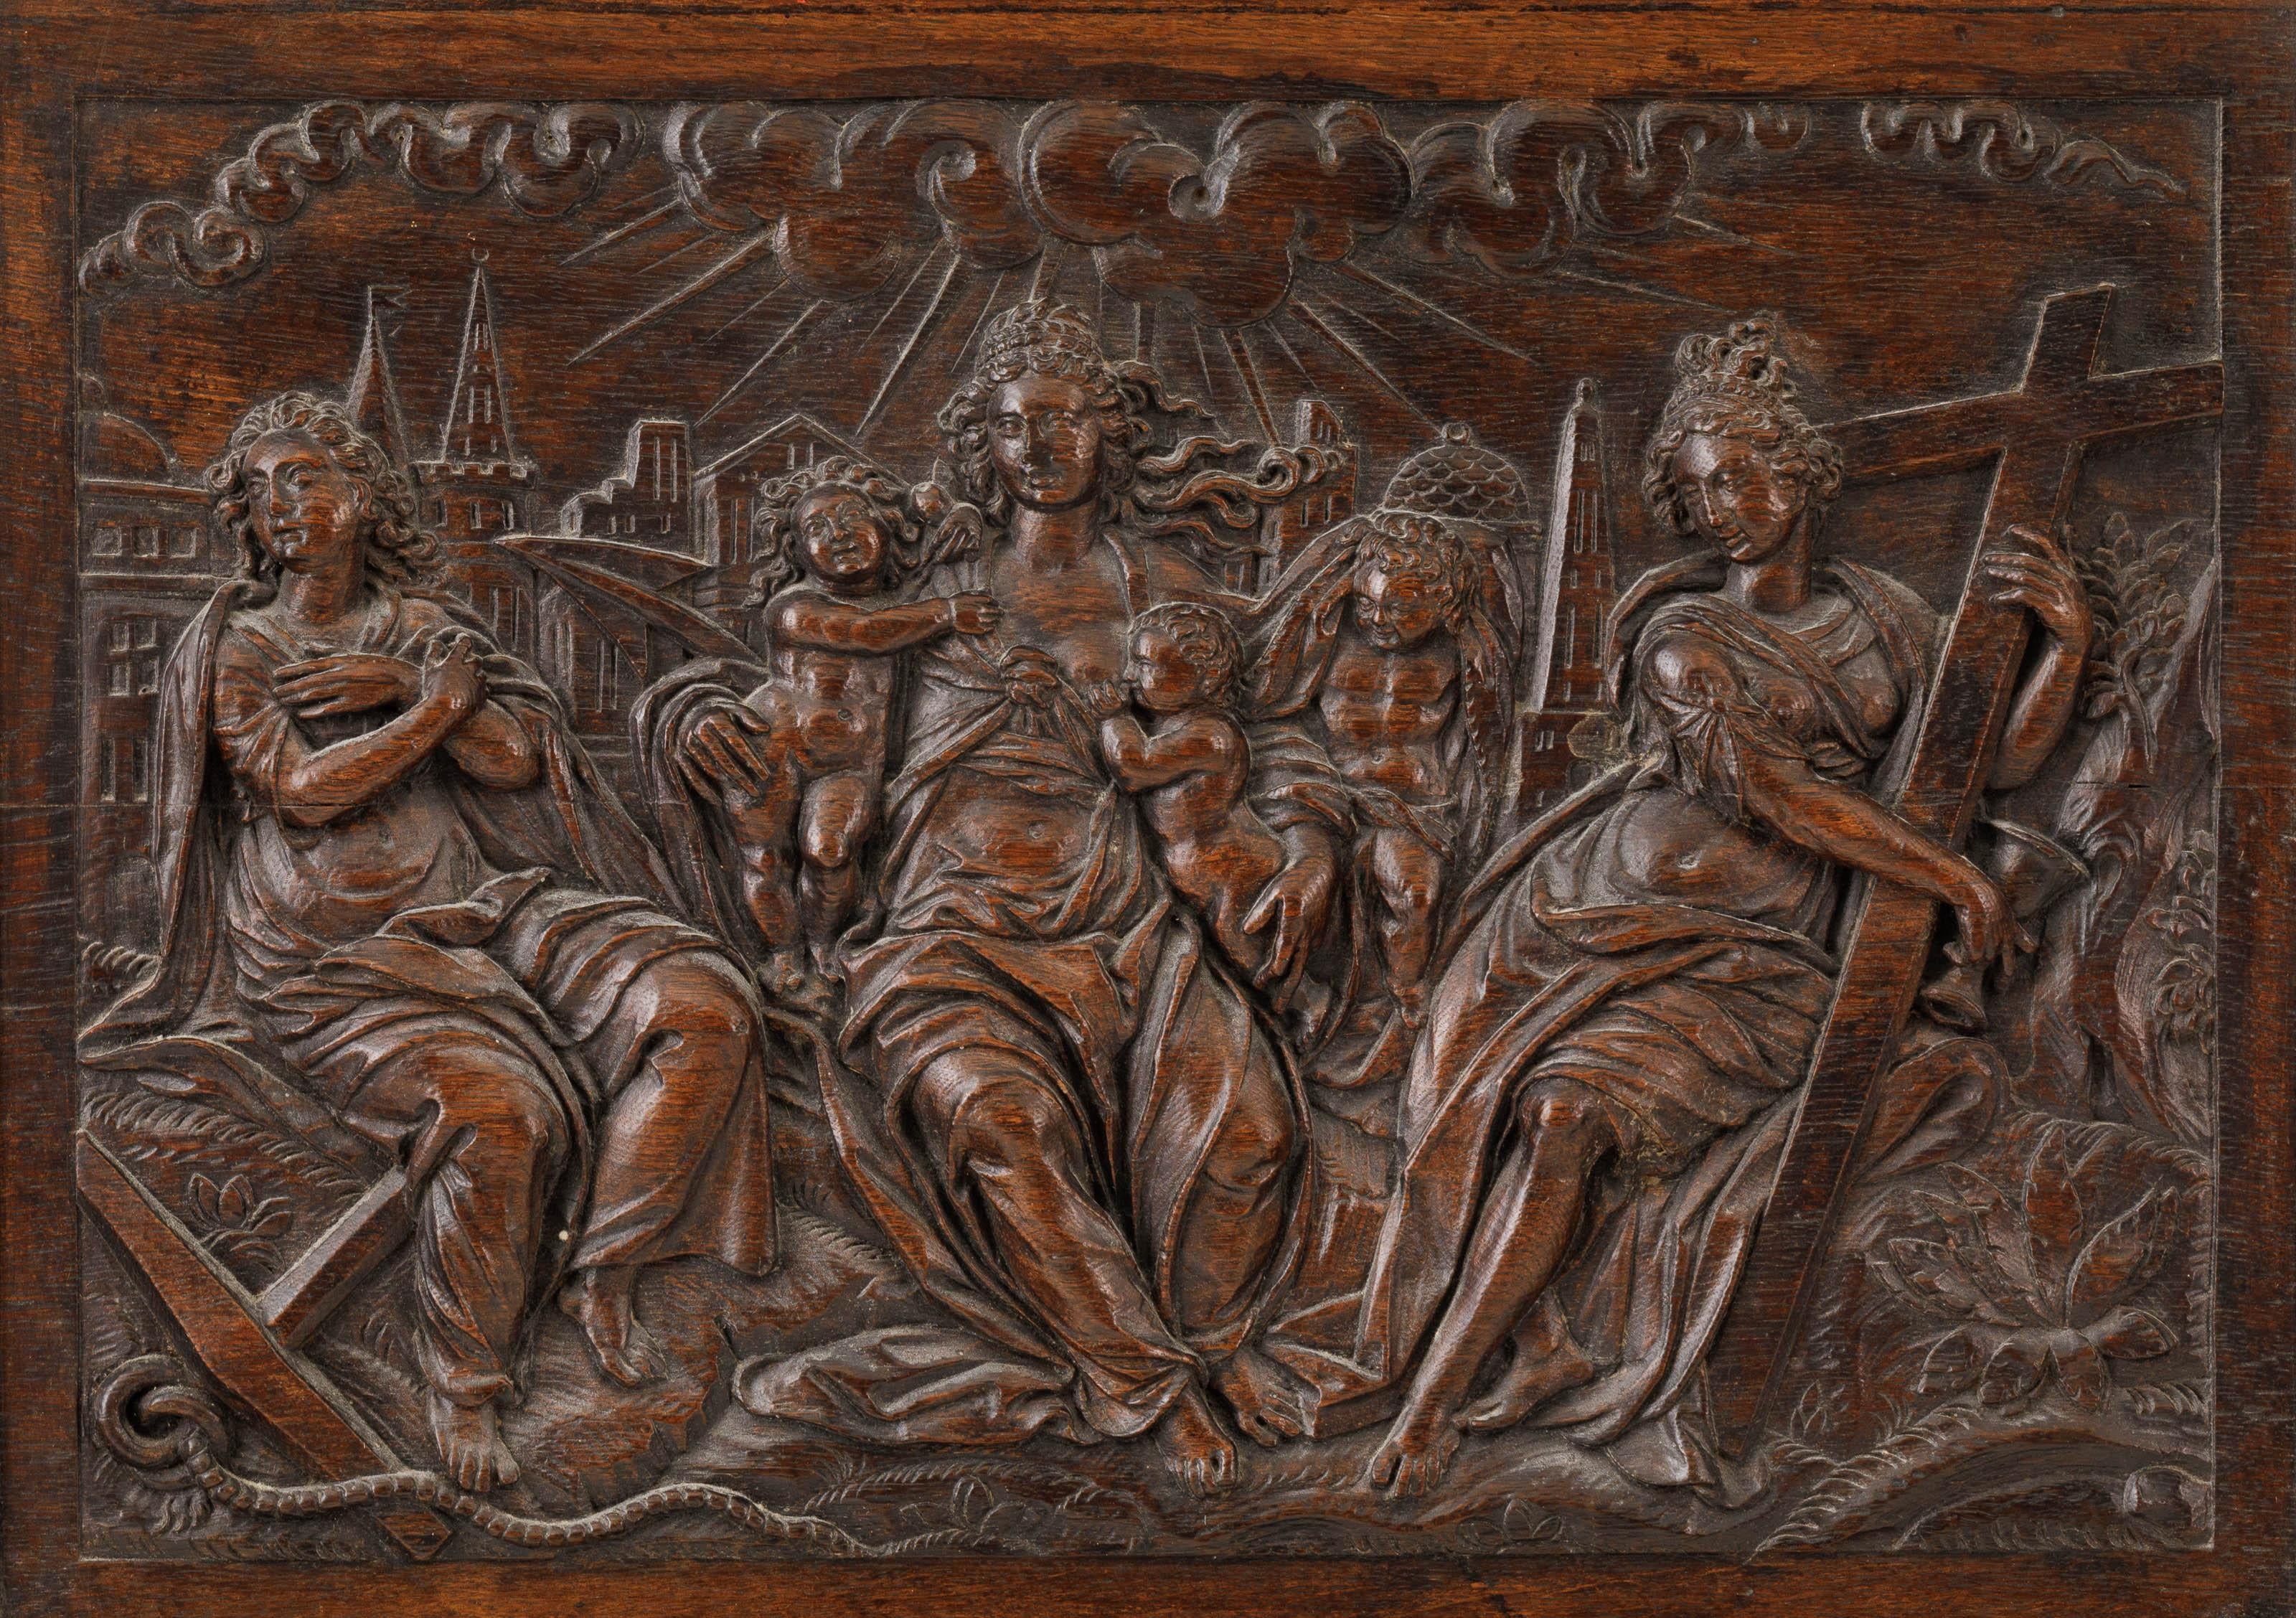 An impressive early 17th century wood relief carving of the Three Divine Virtues

After Jan Pietersz Saenredam and Hendrik Goltzius
First quarter of the 17th century; Northern Netherlands
Approximate size: 35.5 x 50 cm (without frame); 53 x 67